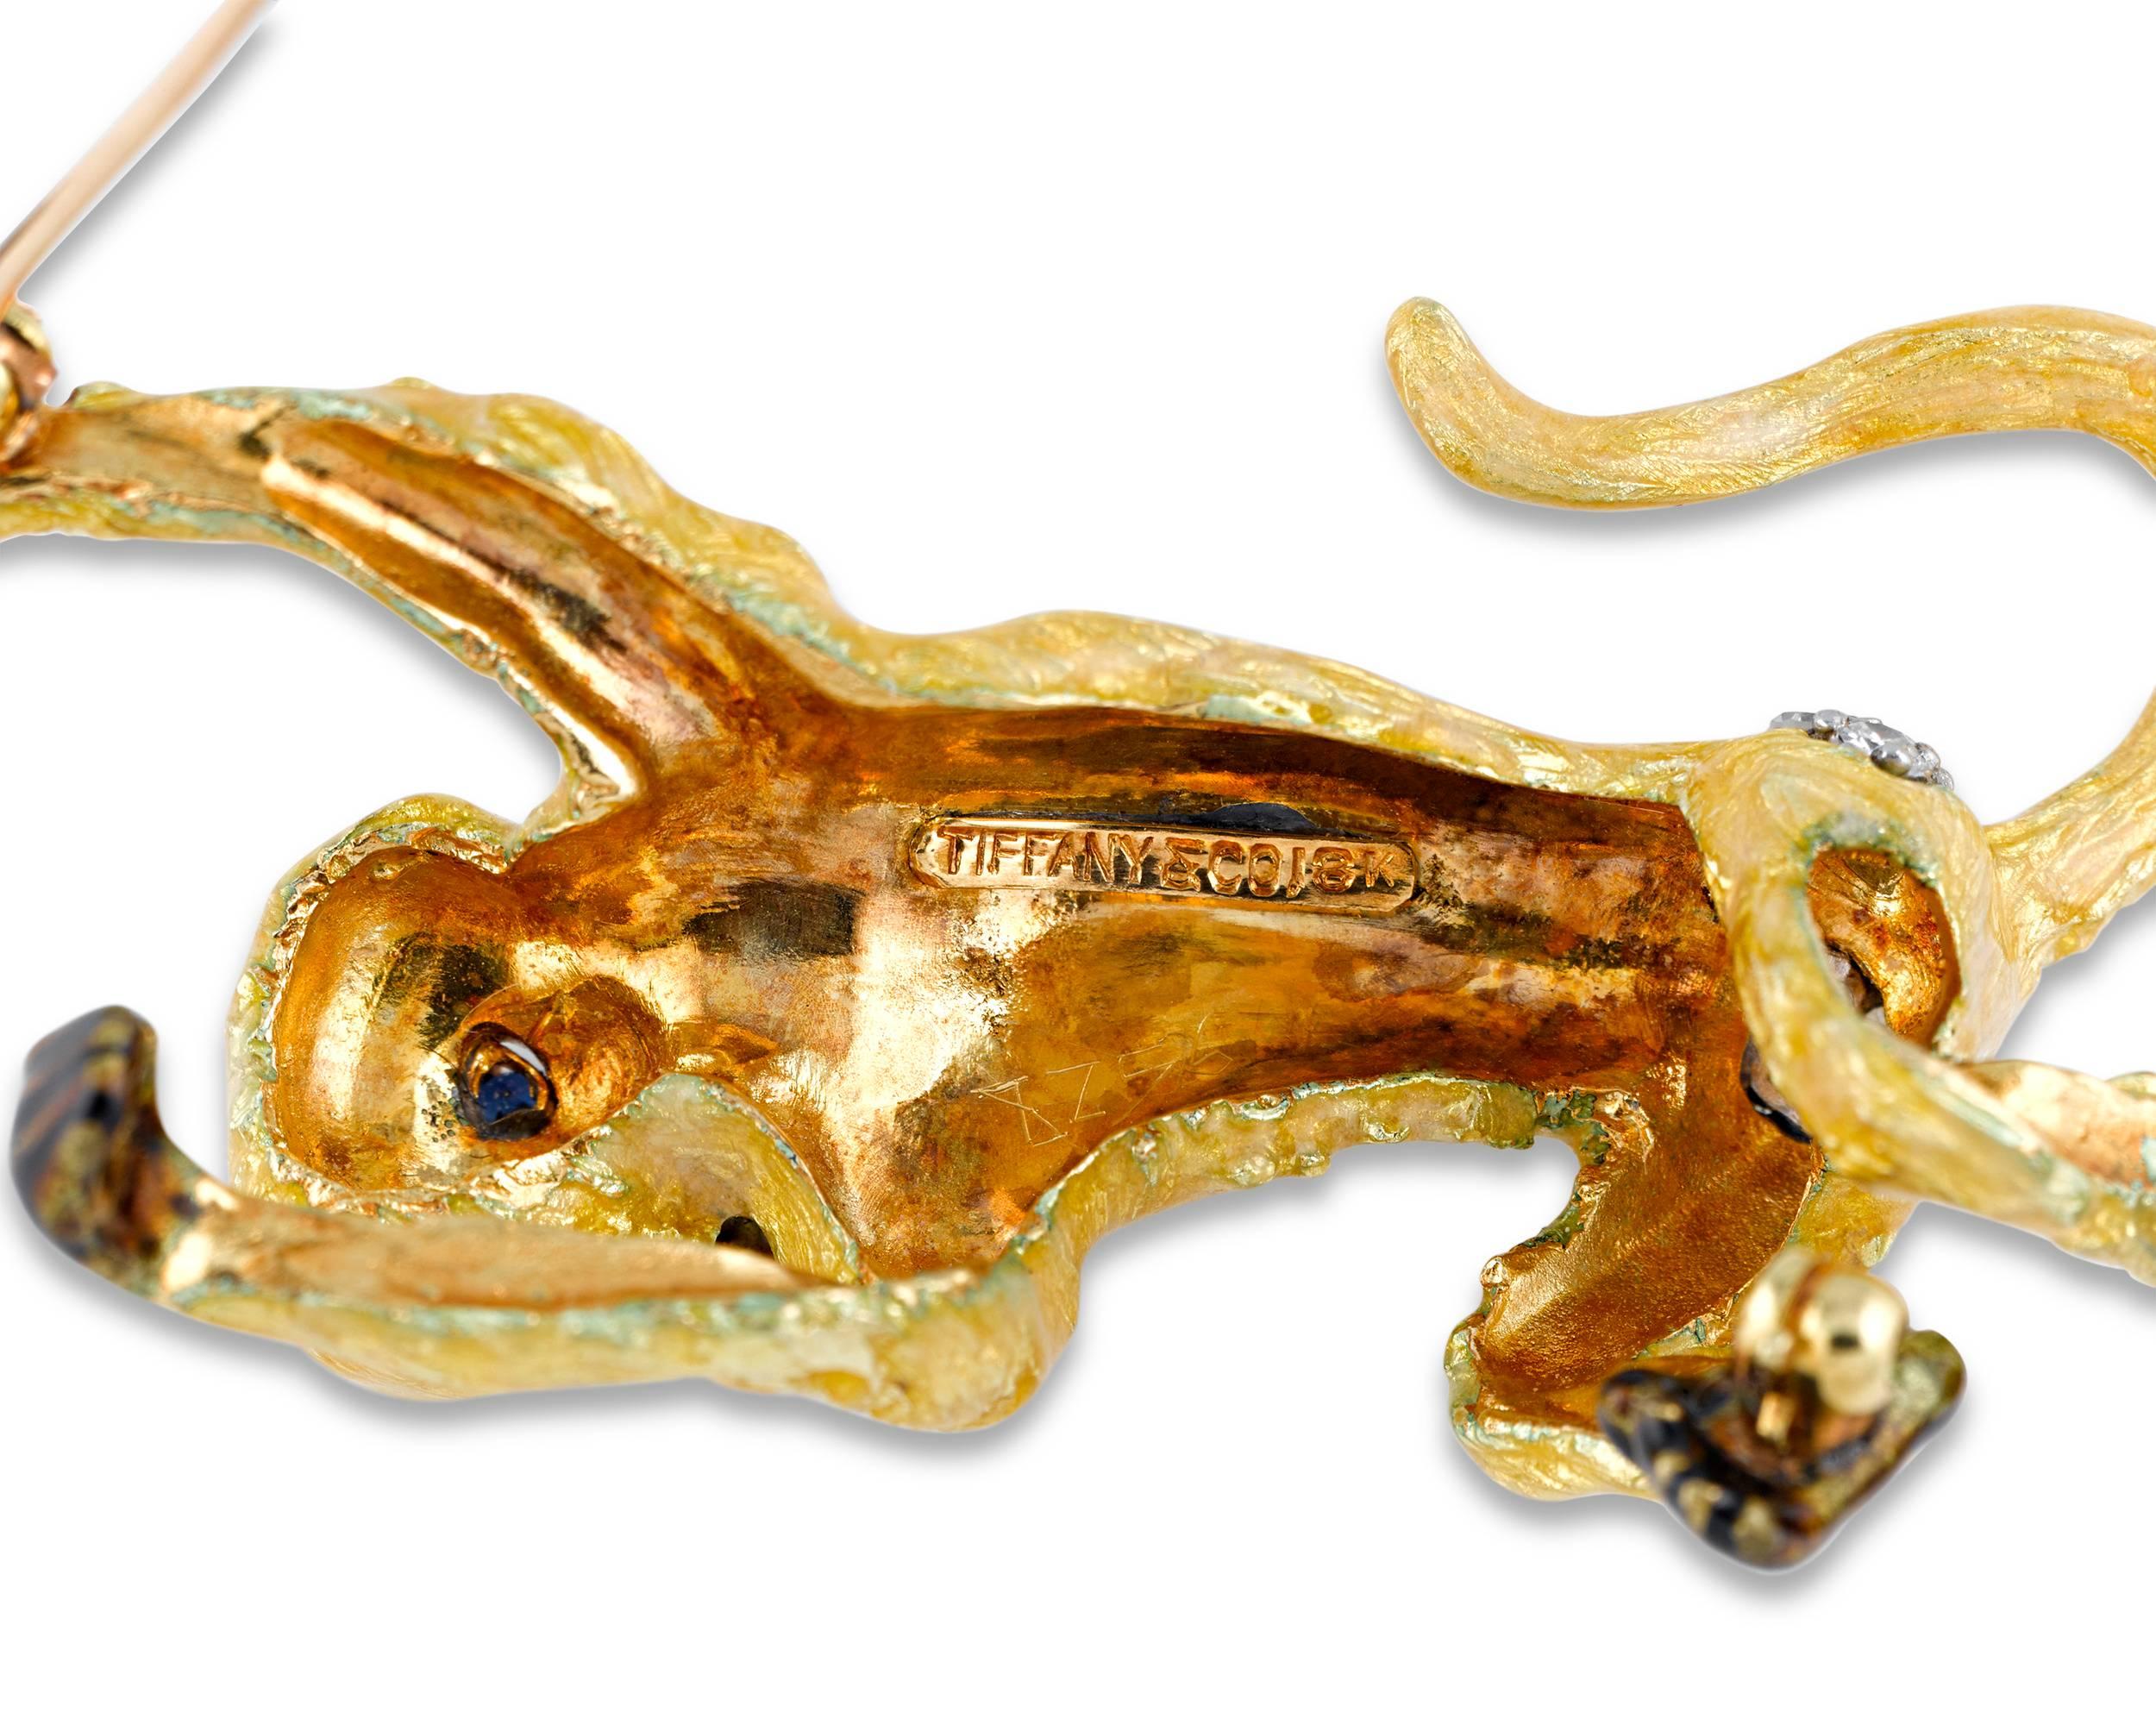 With twinkling sapphire eyes and diamond-accented haunches, this incredibly detailed rhesus monkey brooch was created by Tiffany & Co. Crafted of exquisitely worked 18K yellow gold, the body of this playful primate is covered in translucent gold